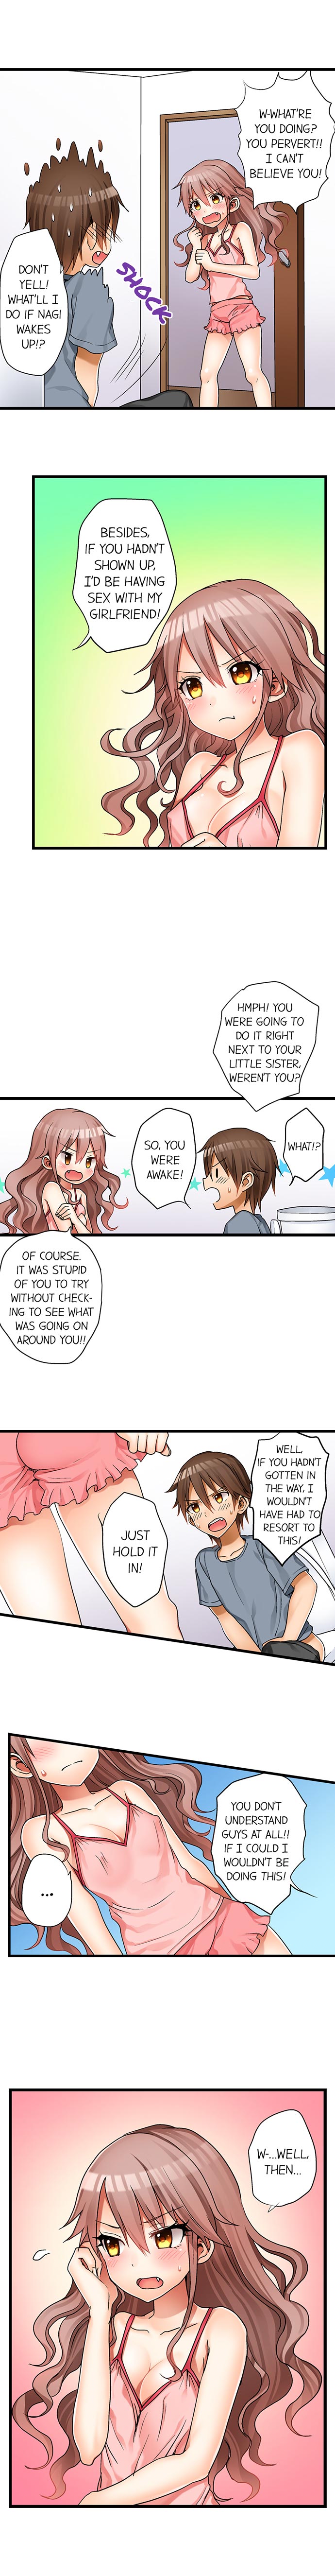 [Porori] My First Time is with.... My Little Sister?! (Ongoing) page 22 full